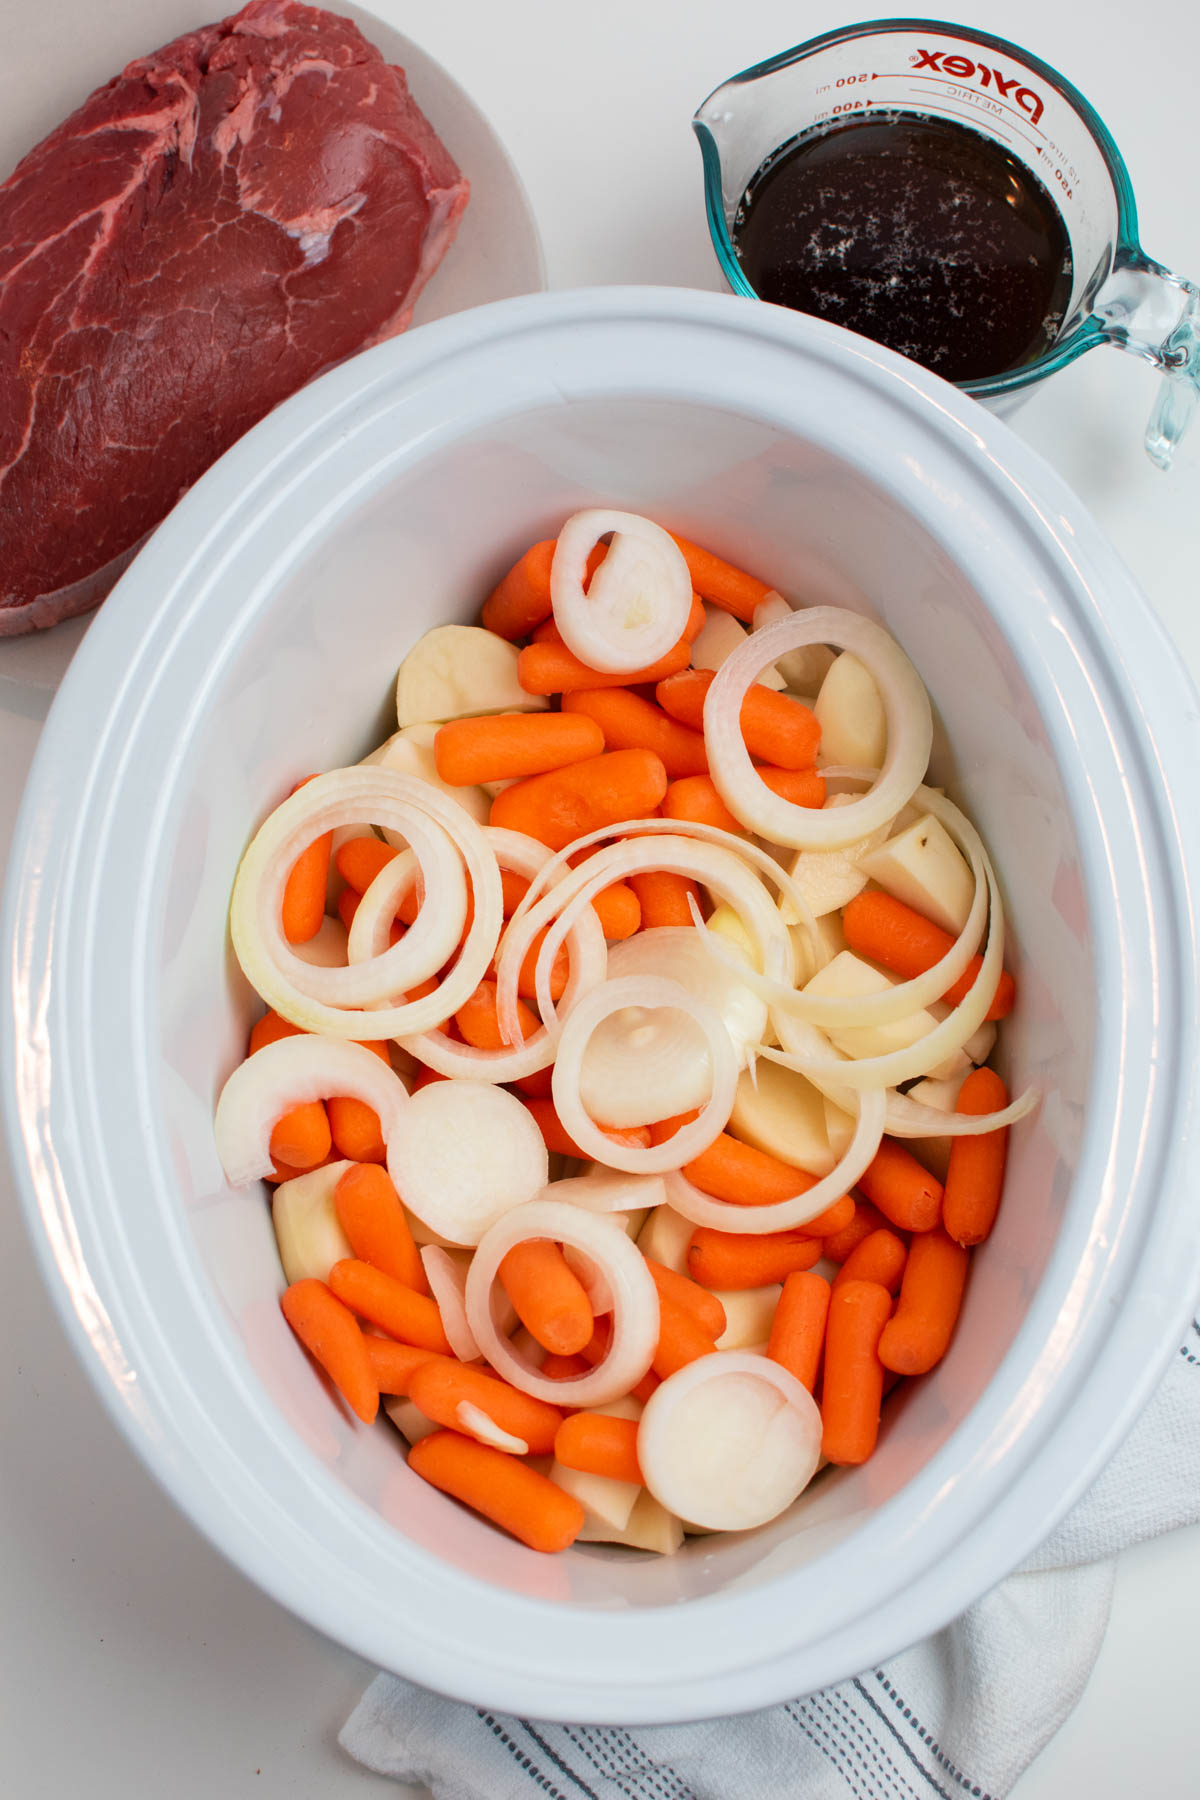 Raw onion rings and baby carrots in white Crock Pot insert with other ingredients nearby.